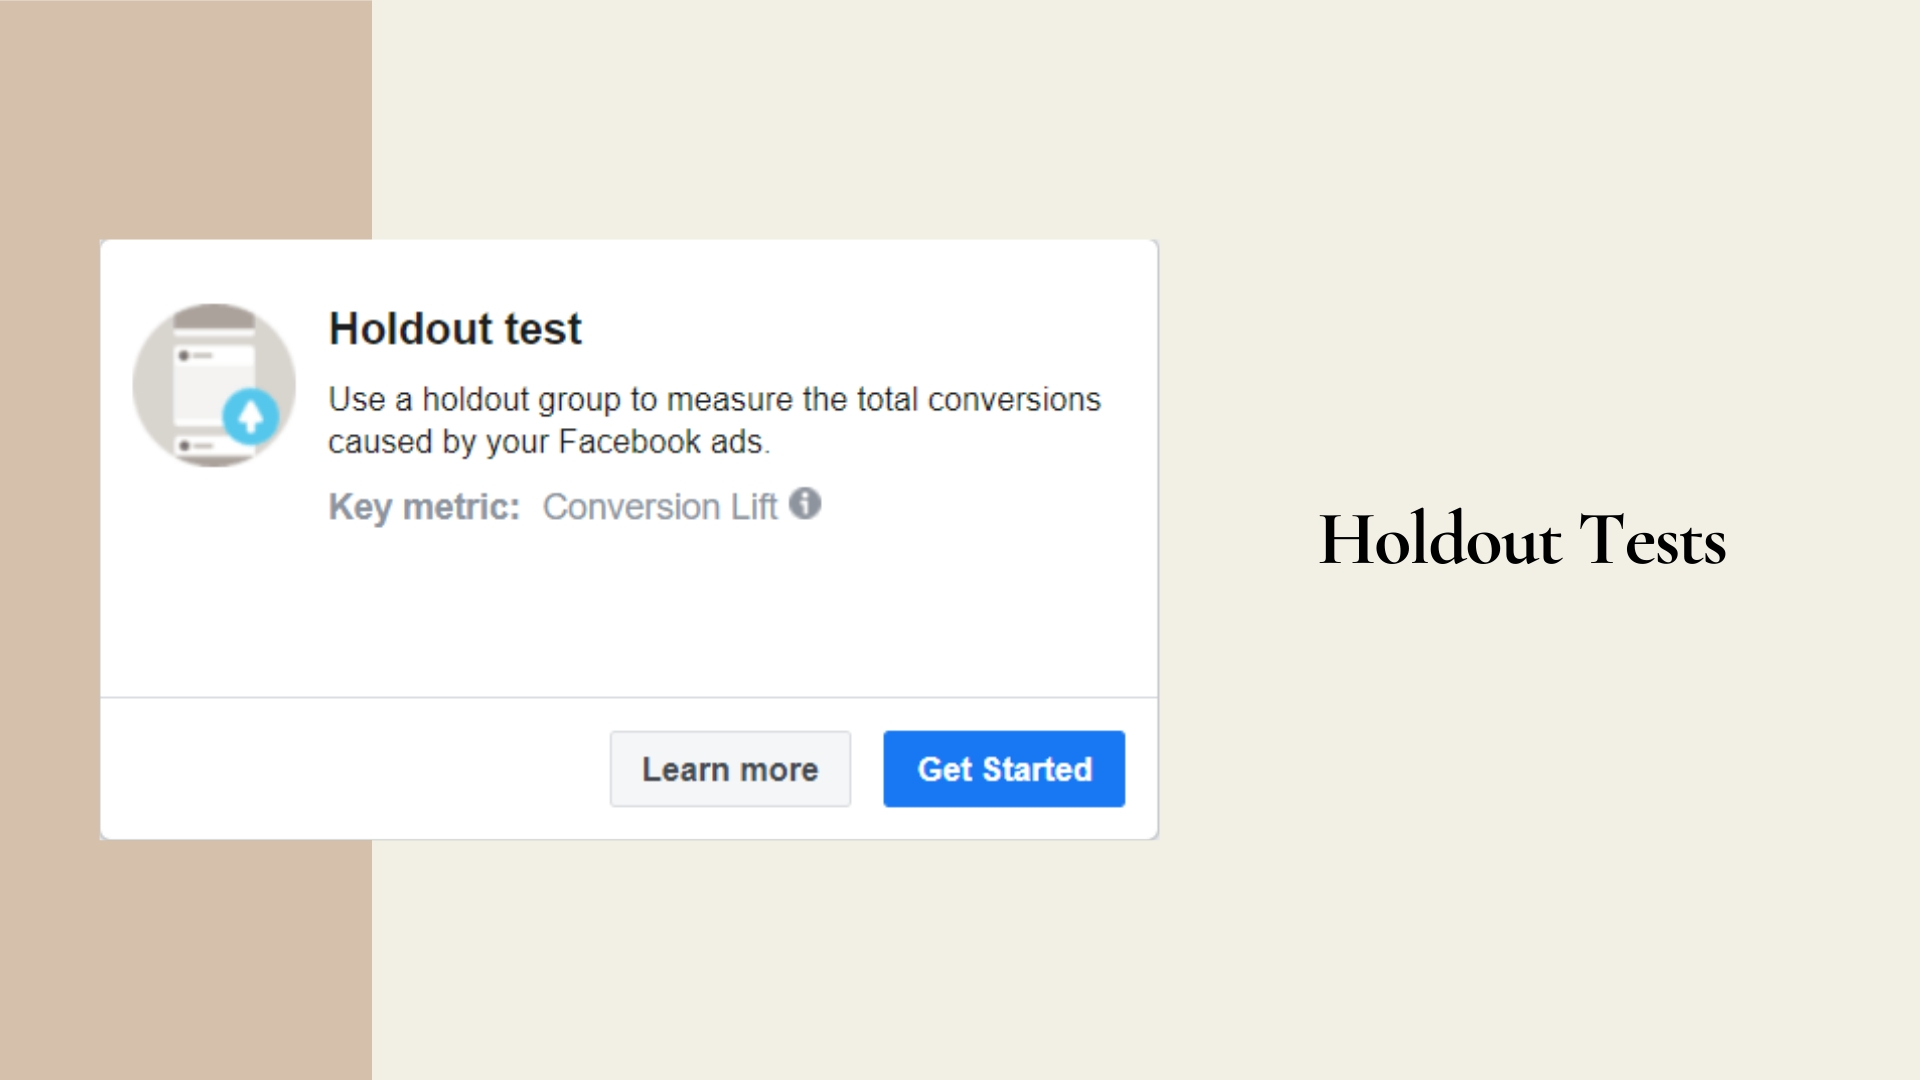 Holdout Tests